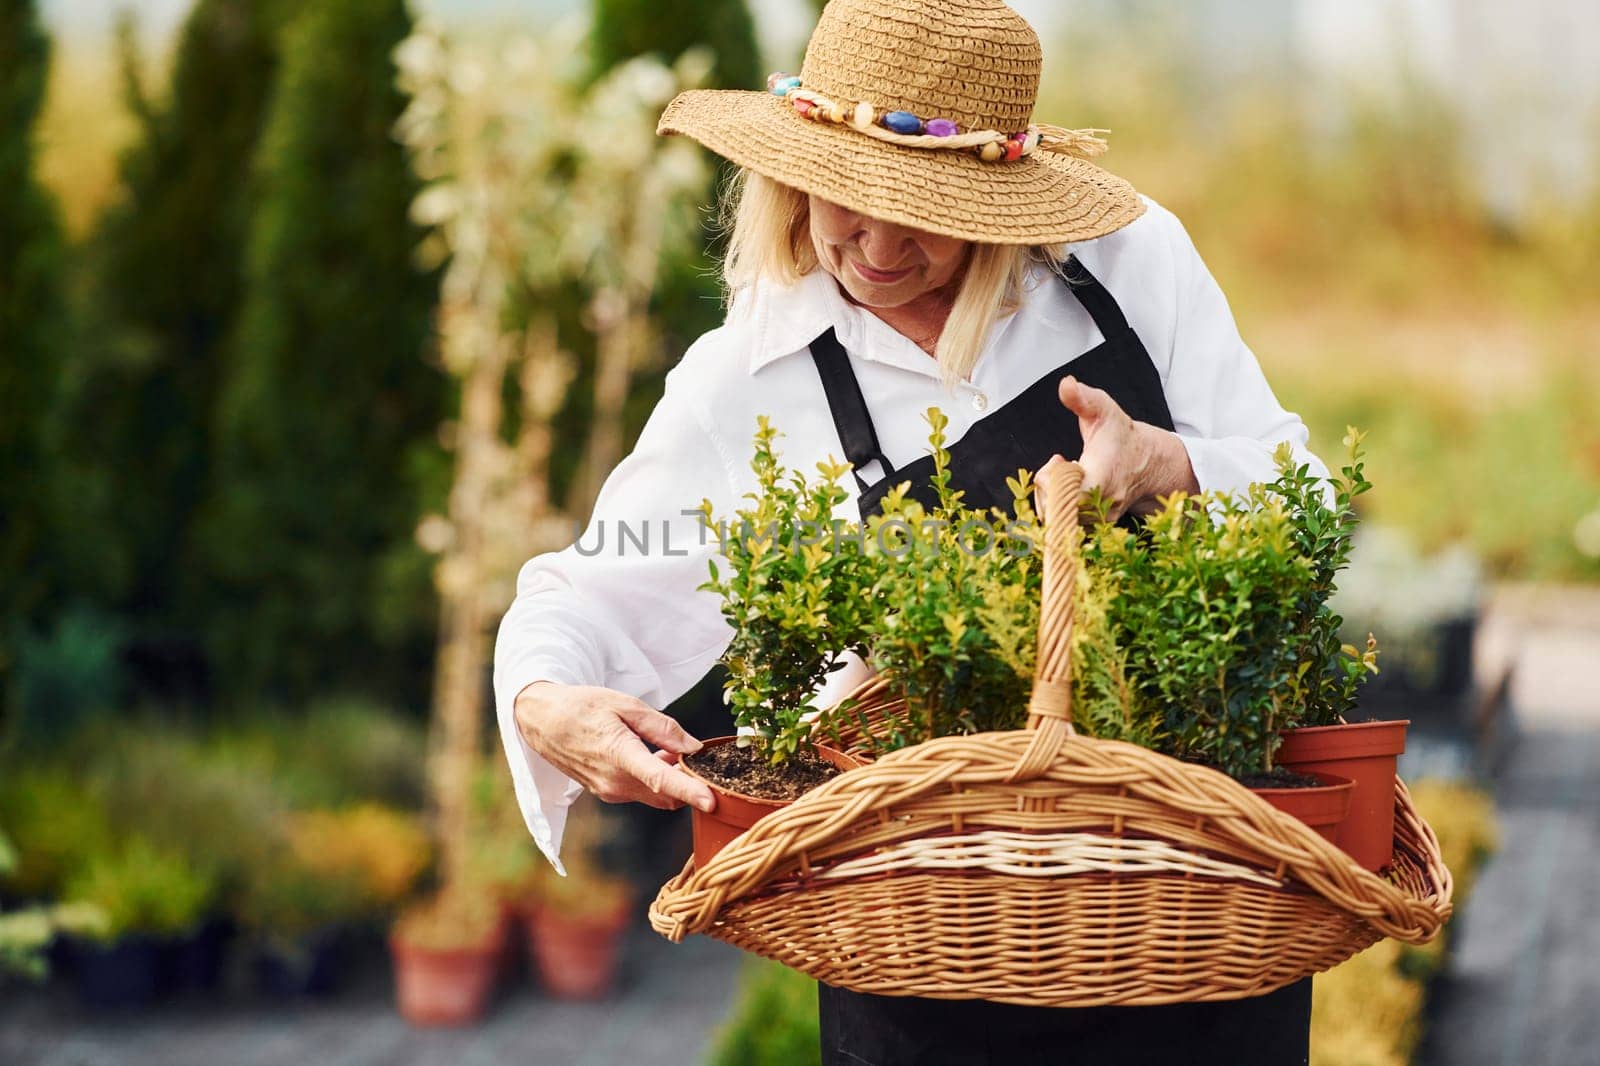 Taking plants in pots by using basket. Senior woman is in the garden at daytime. Conception of plants and seasons.